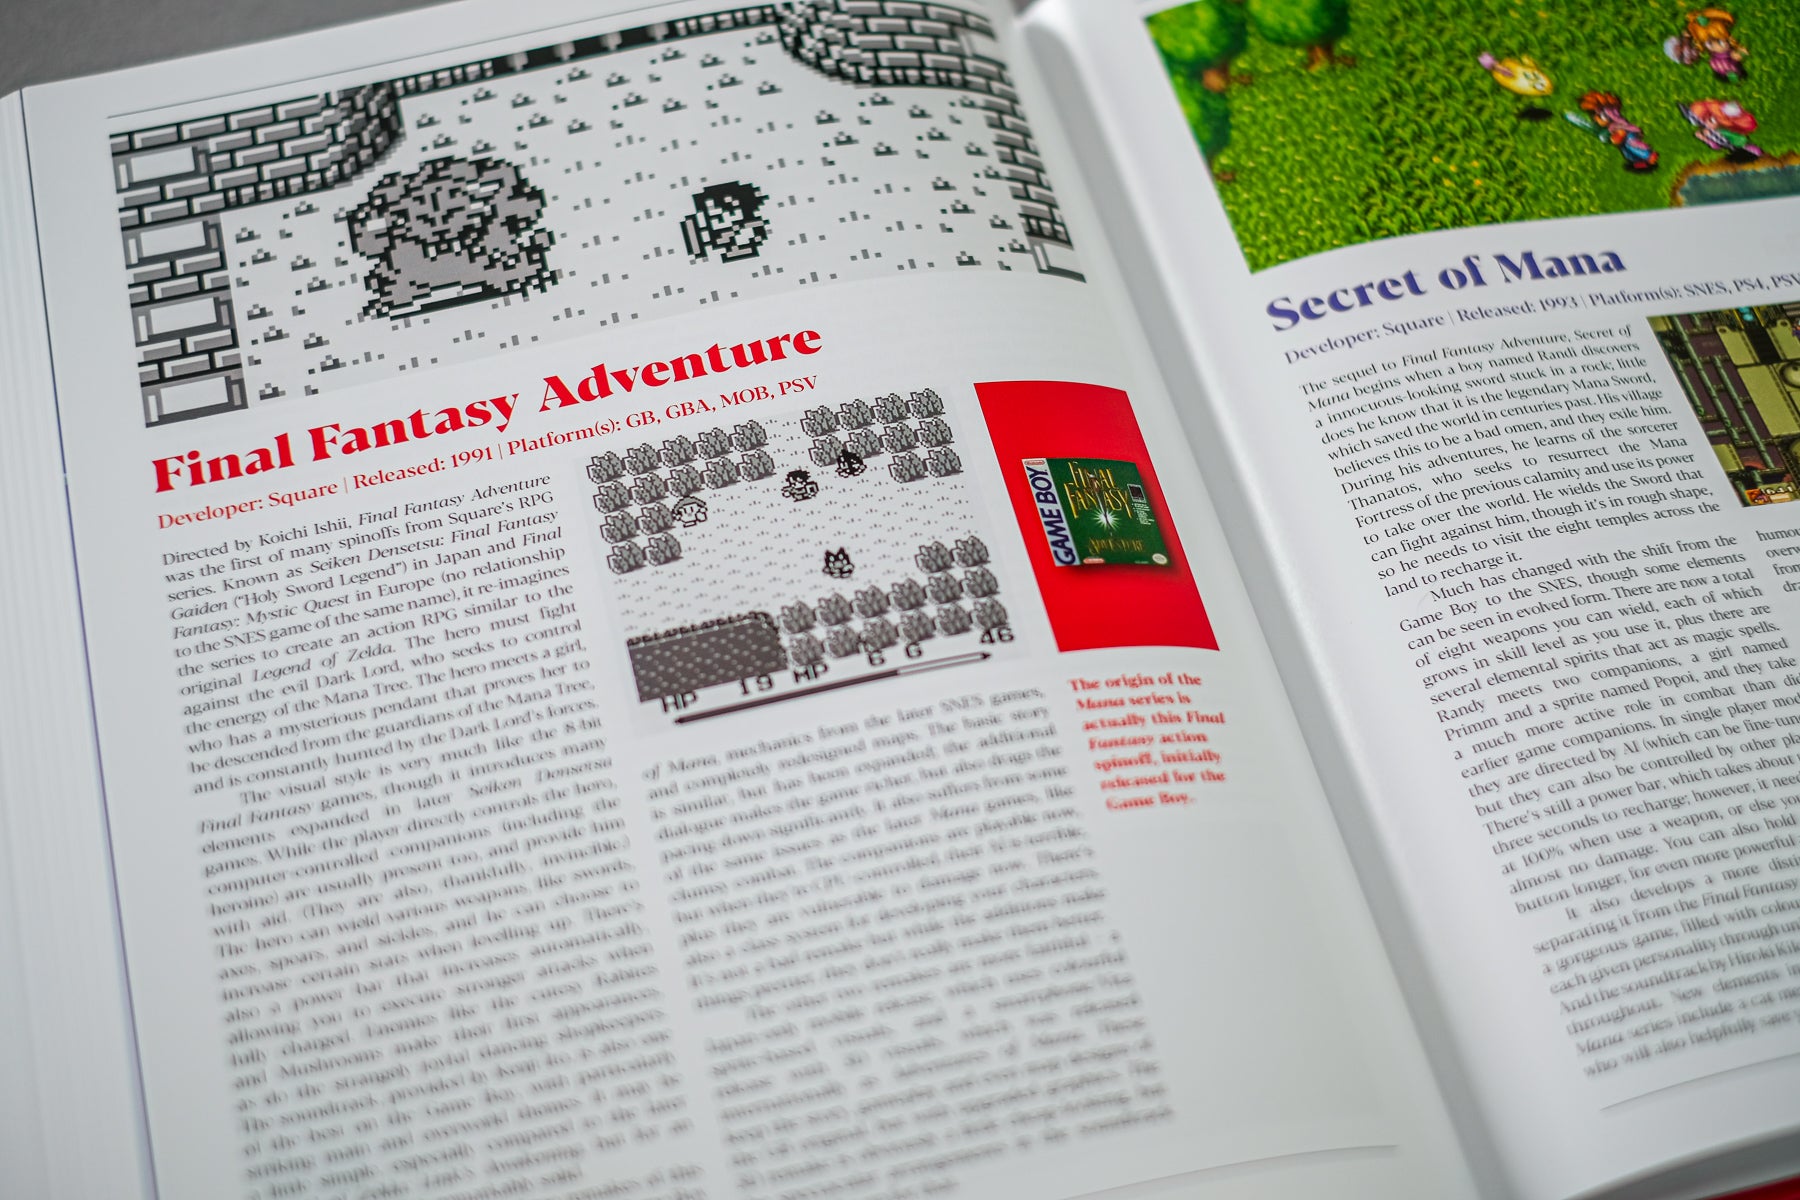 A Guide to Japanese Role-Playing Games - A JRPG history | Bitmap Books